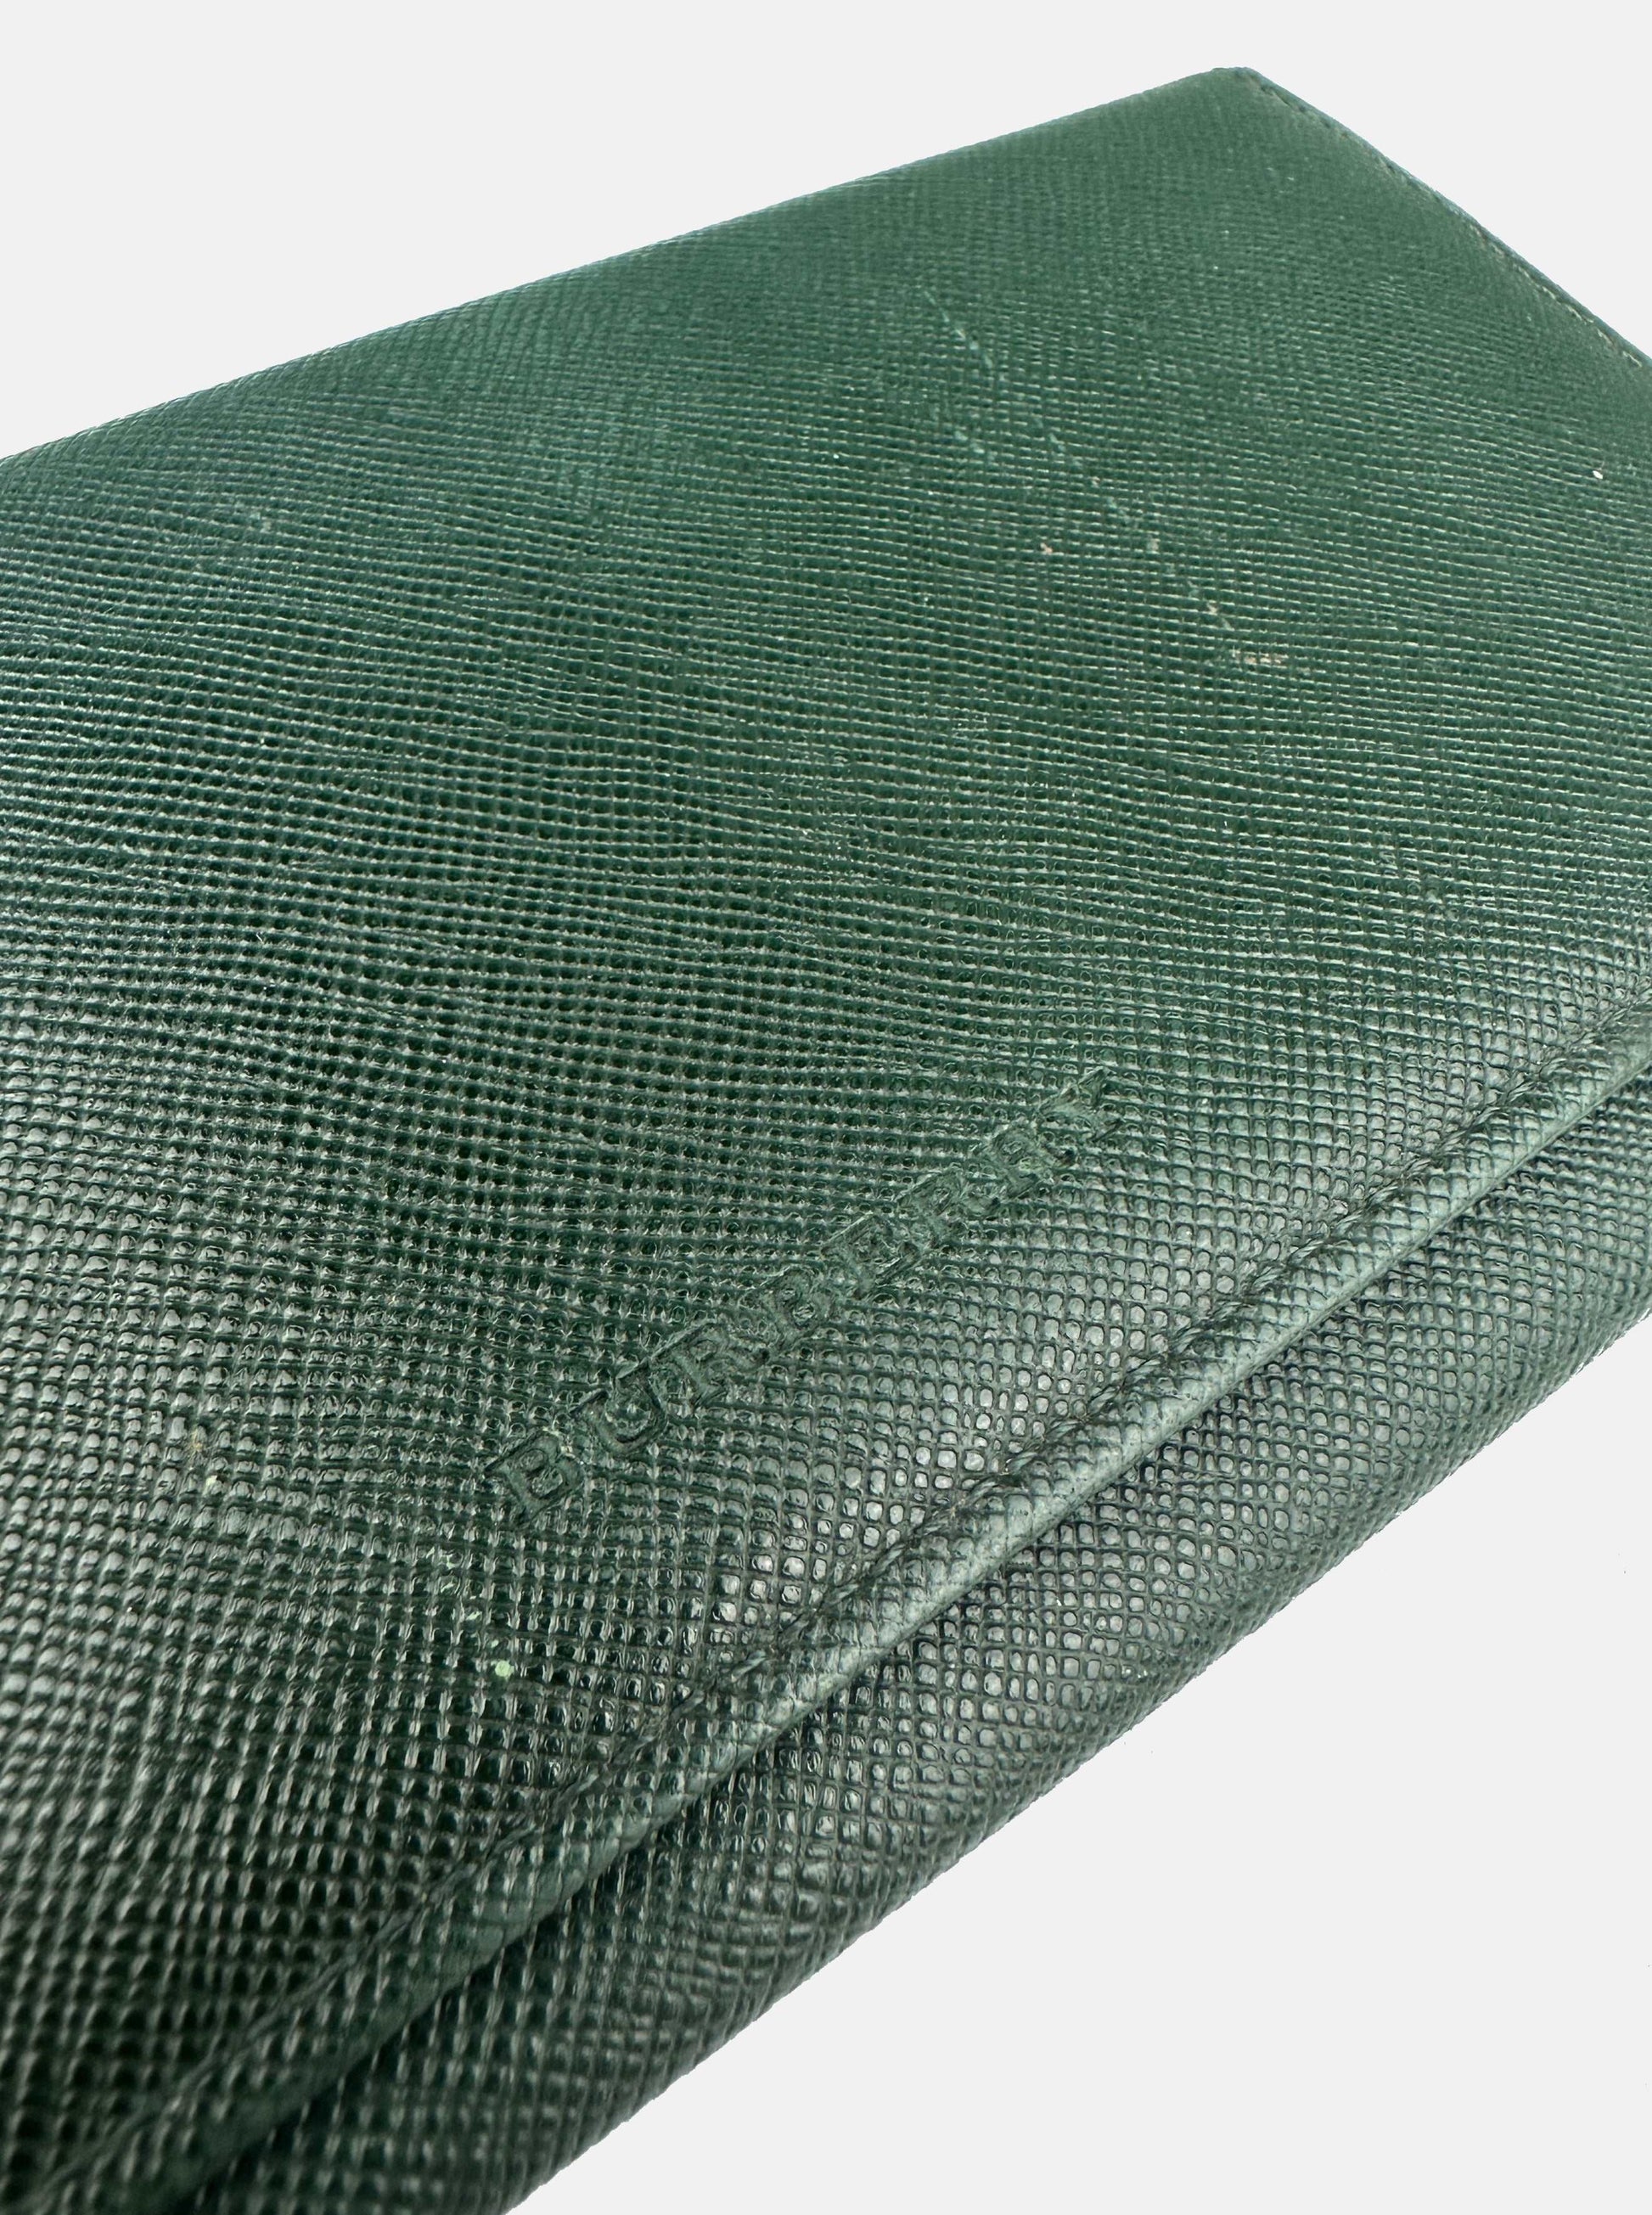 Green Leather Long Wallet